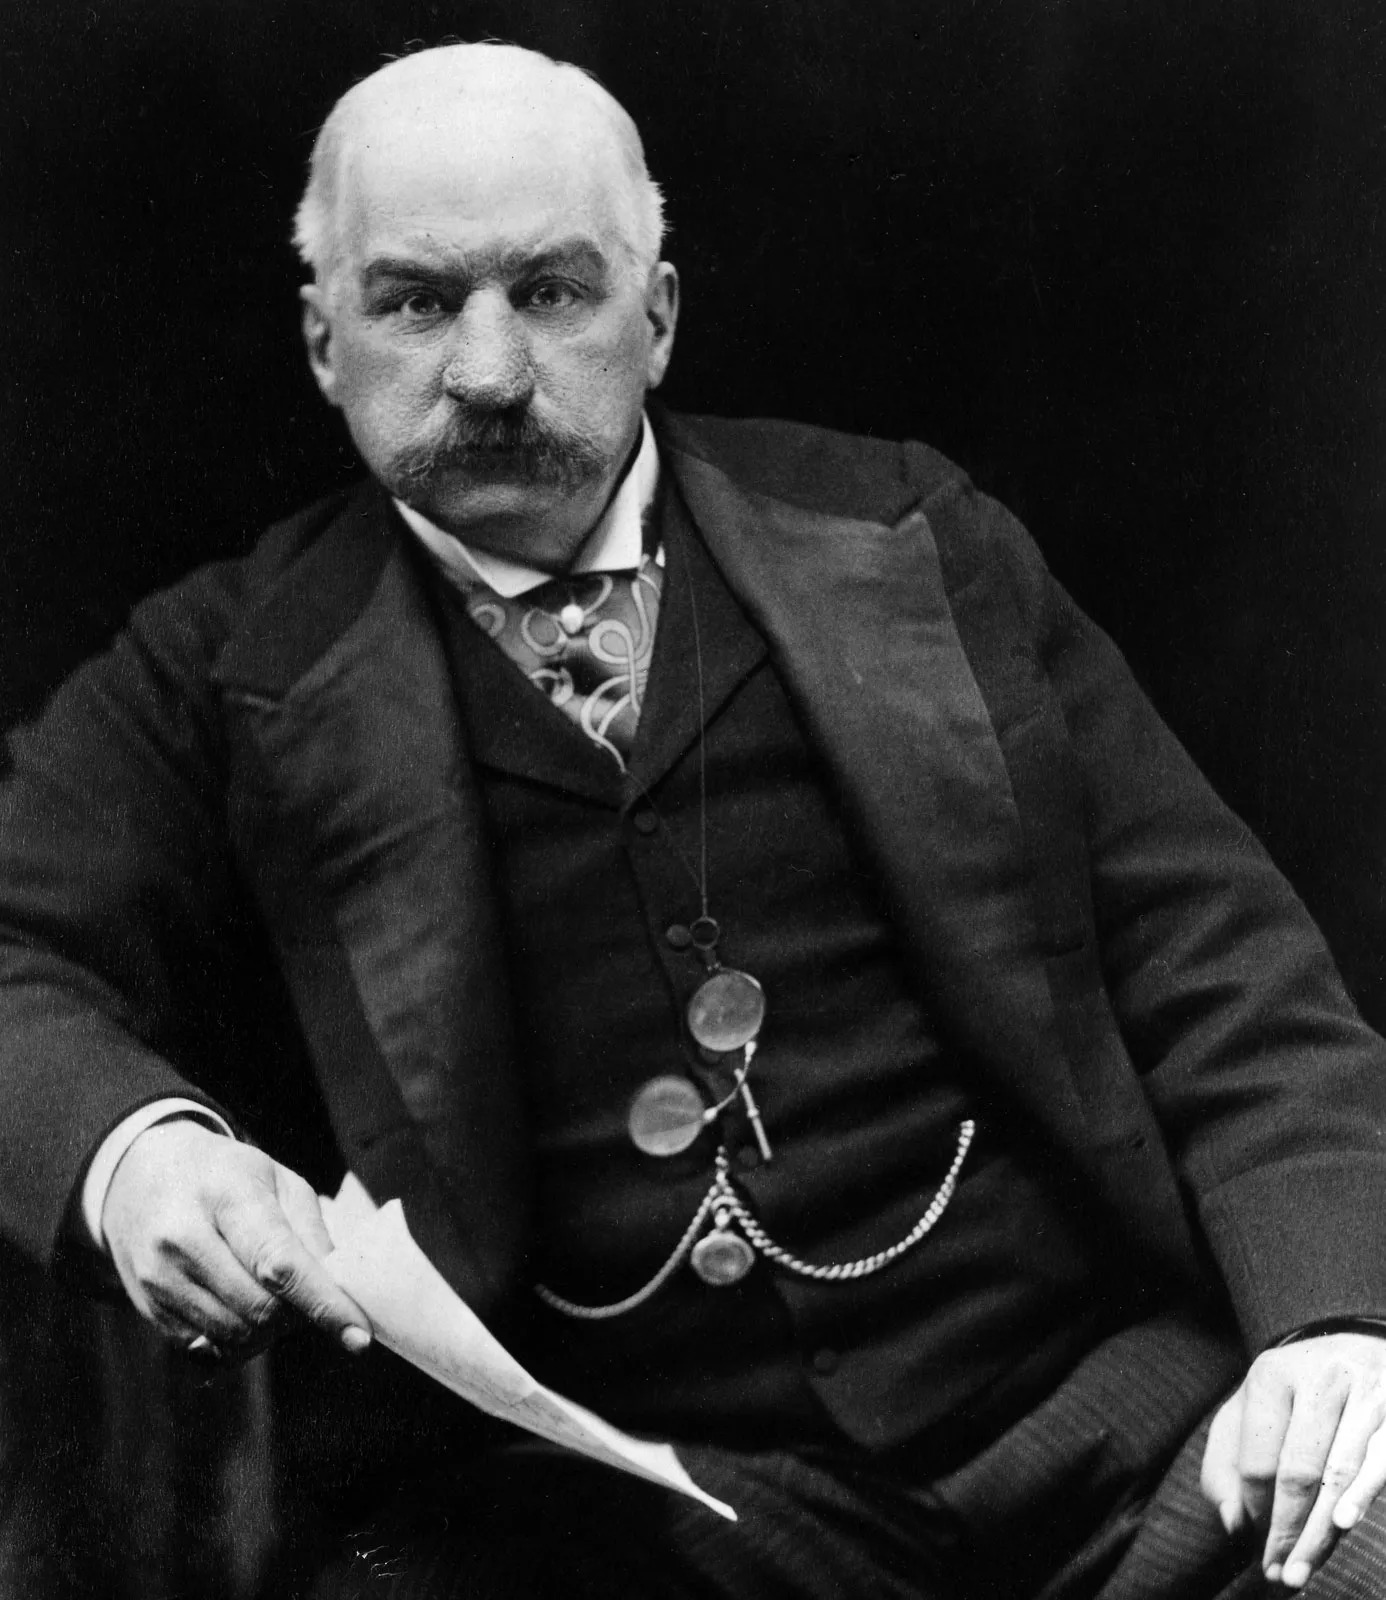 that during the Panic of 1907, J.P. Morgan organized a coalition of financiers that saved the American monetary system from collapse.